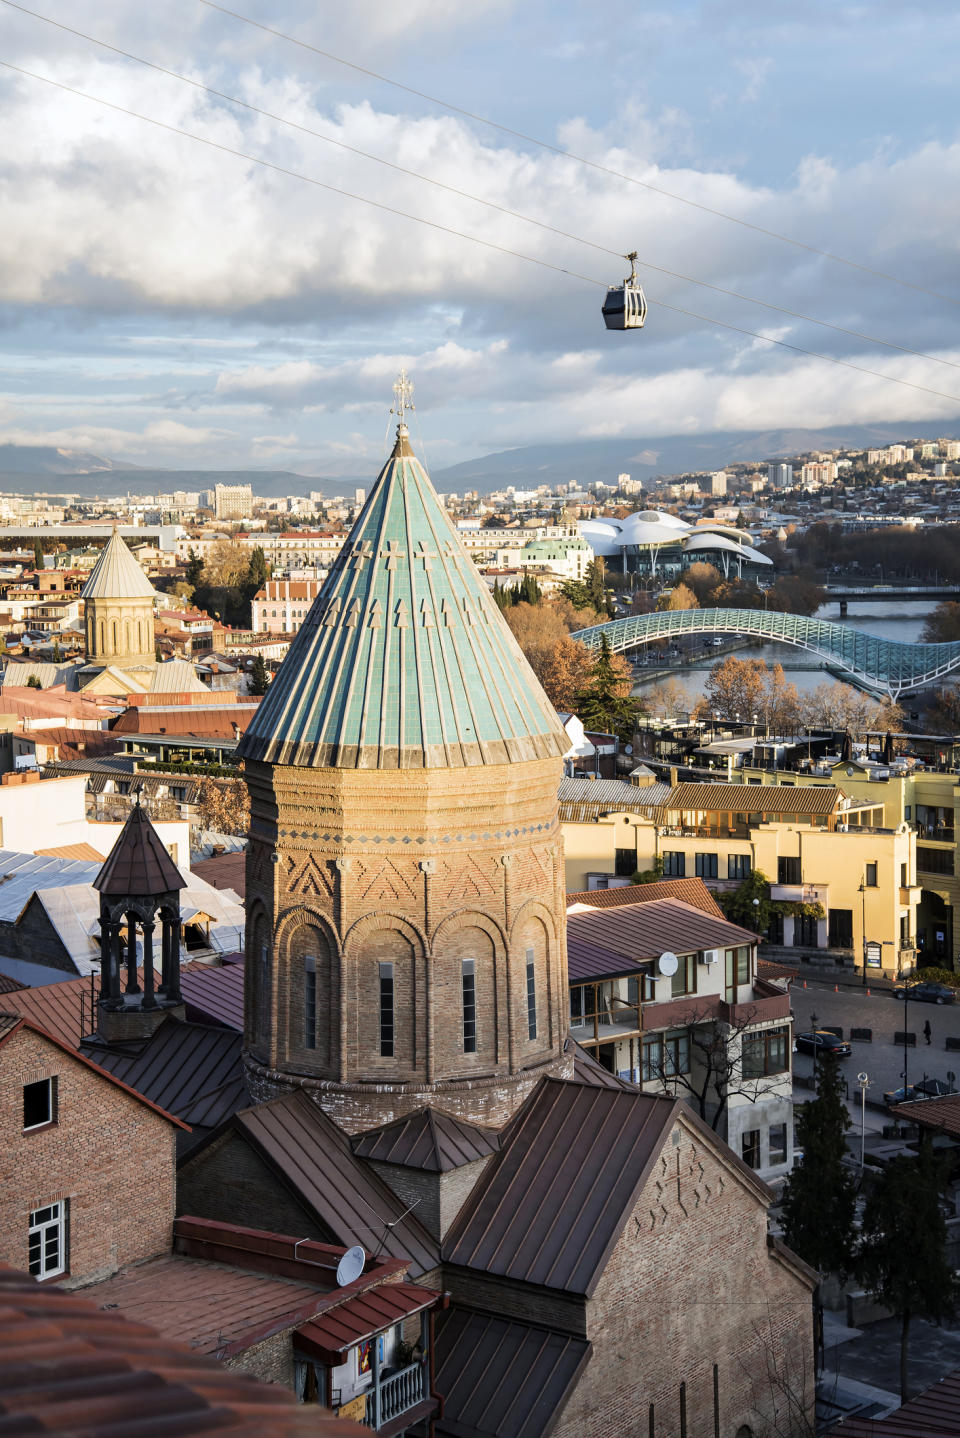 Aerial view of Tbilisi with Narikala Fortress, cable car, and historical architecture